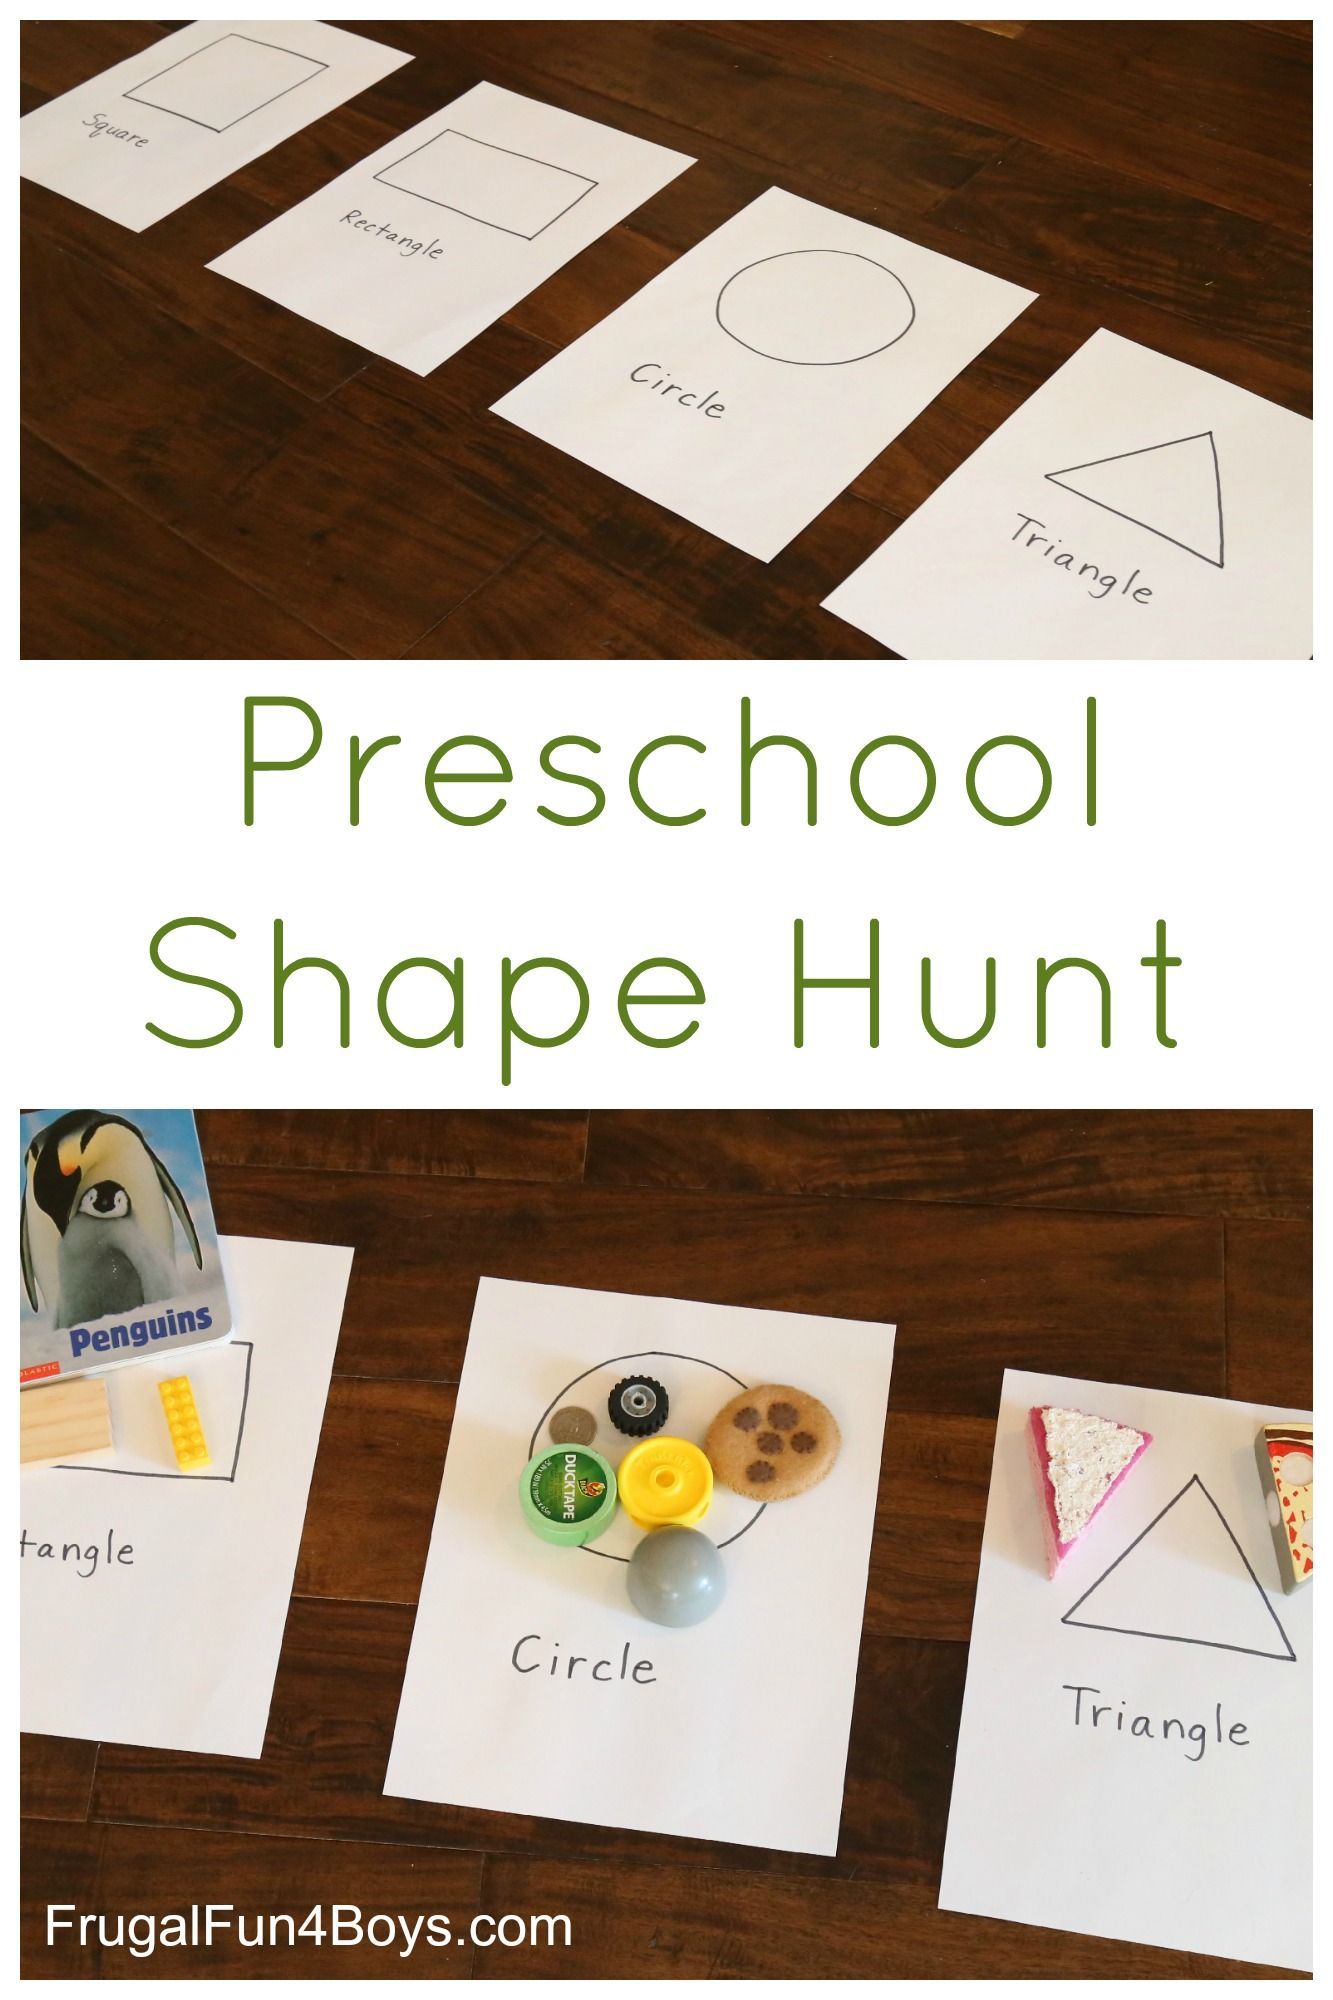 Preschool Shape Hunt – A super simple shape activity for preschoolers that requires only a minute to set up